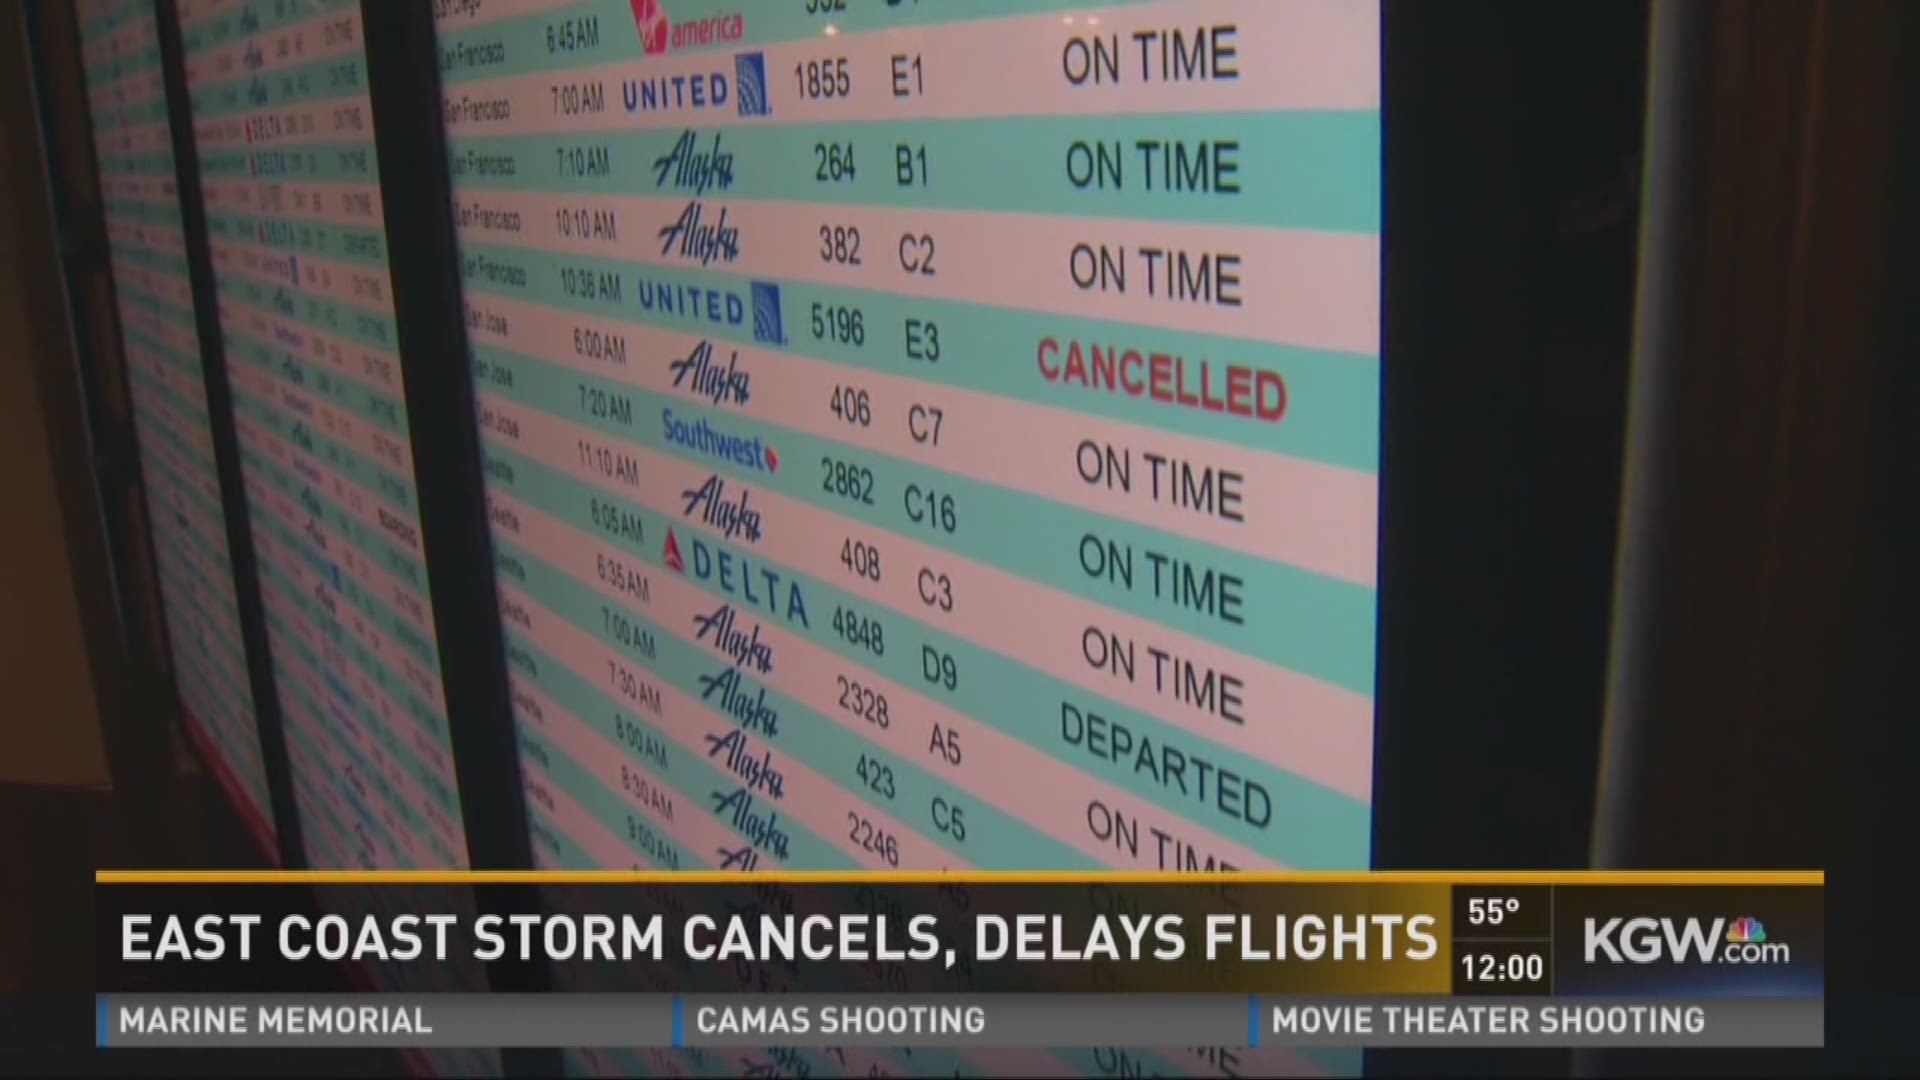 Eastern storm causes thousands of delays